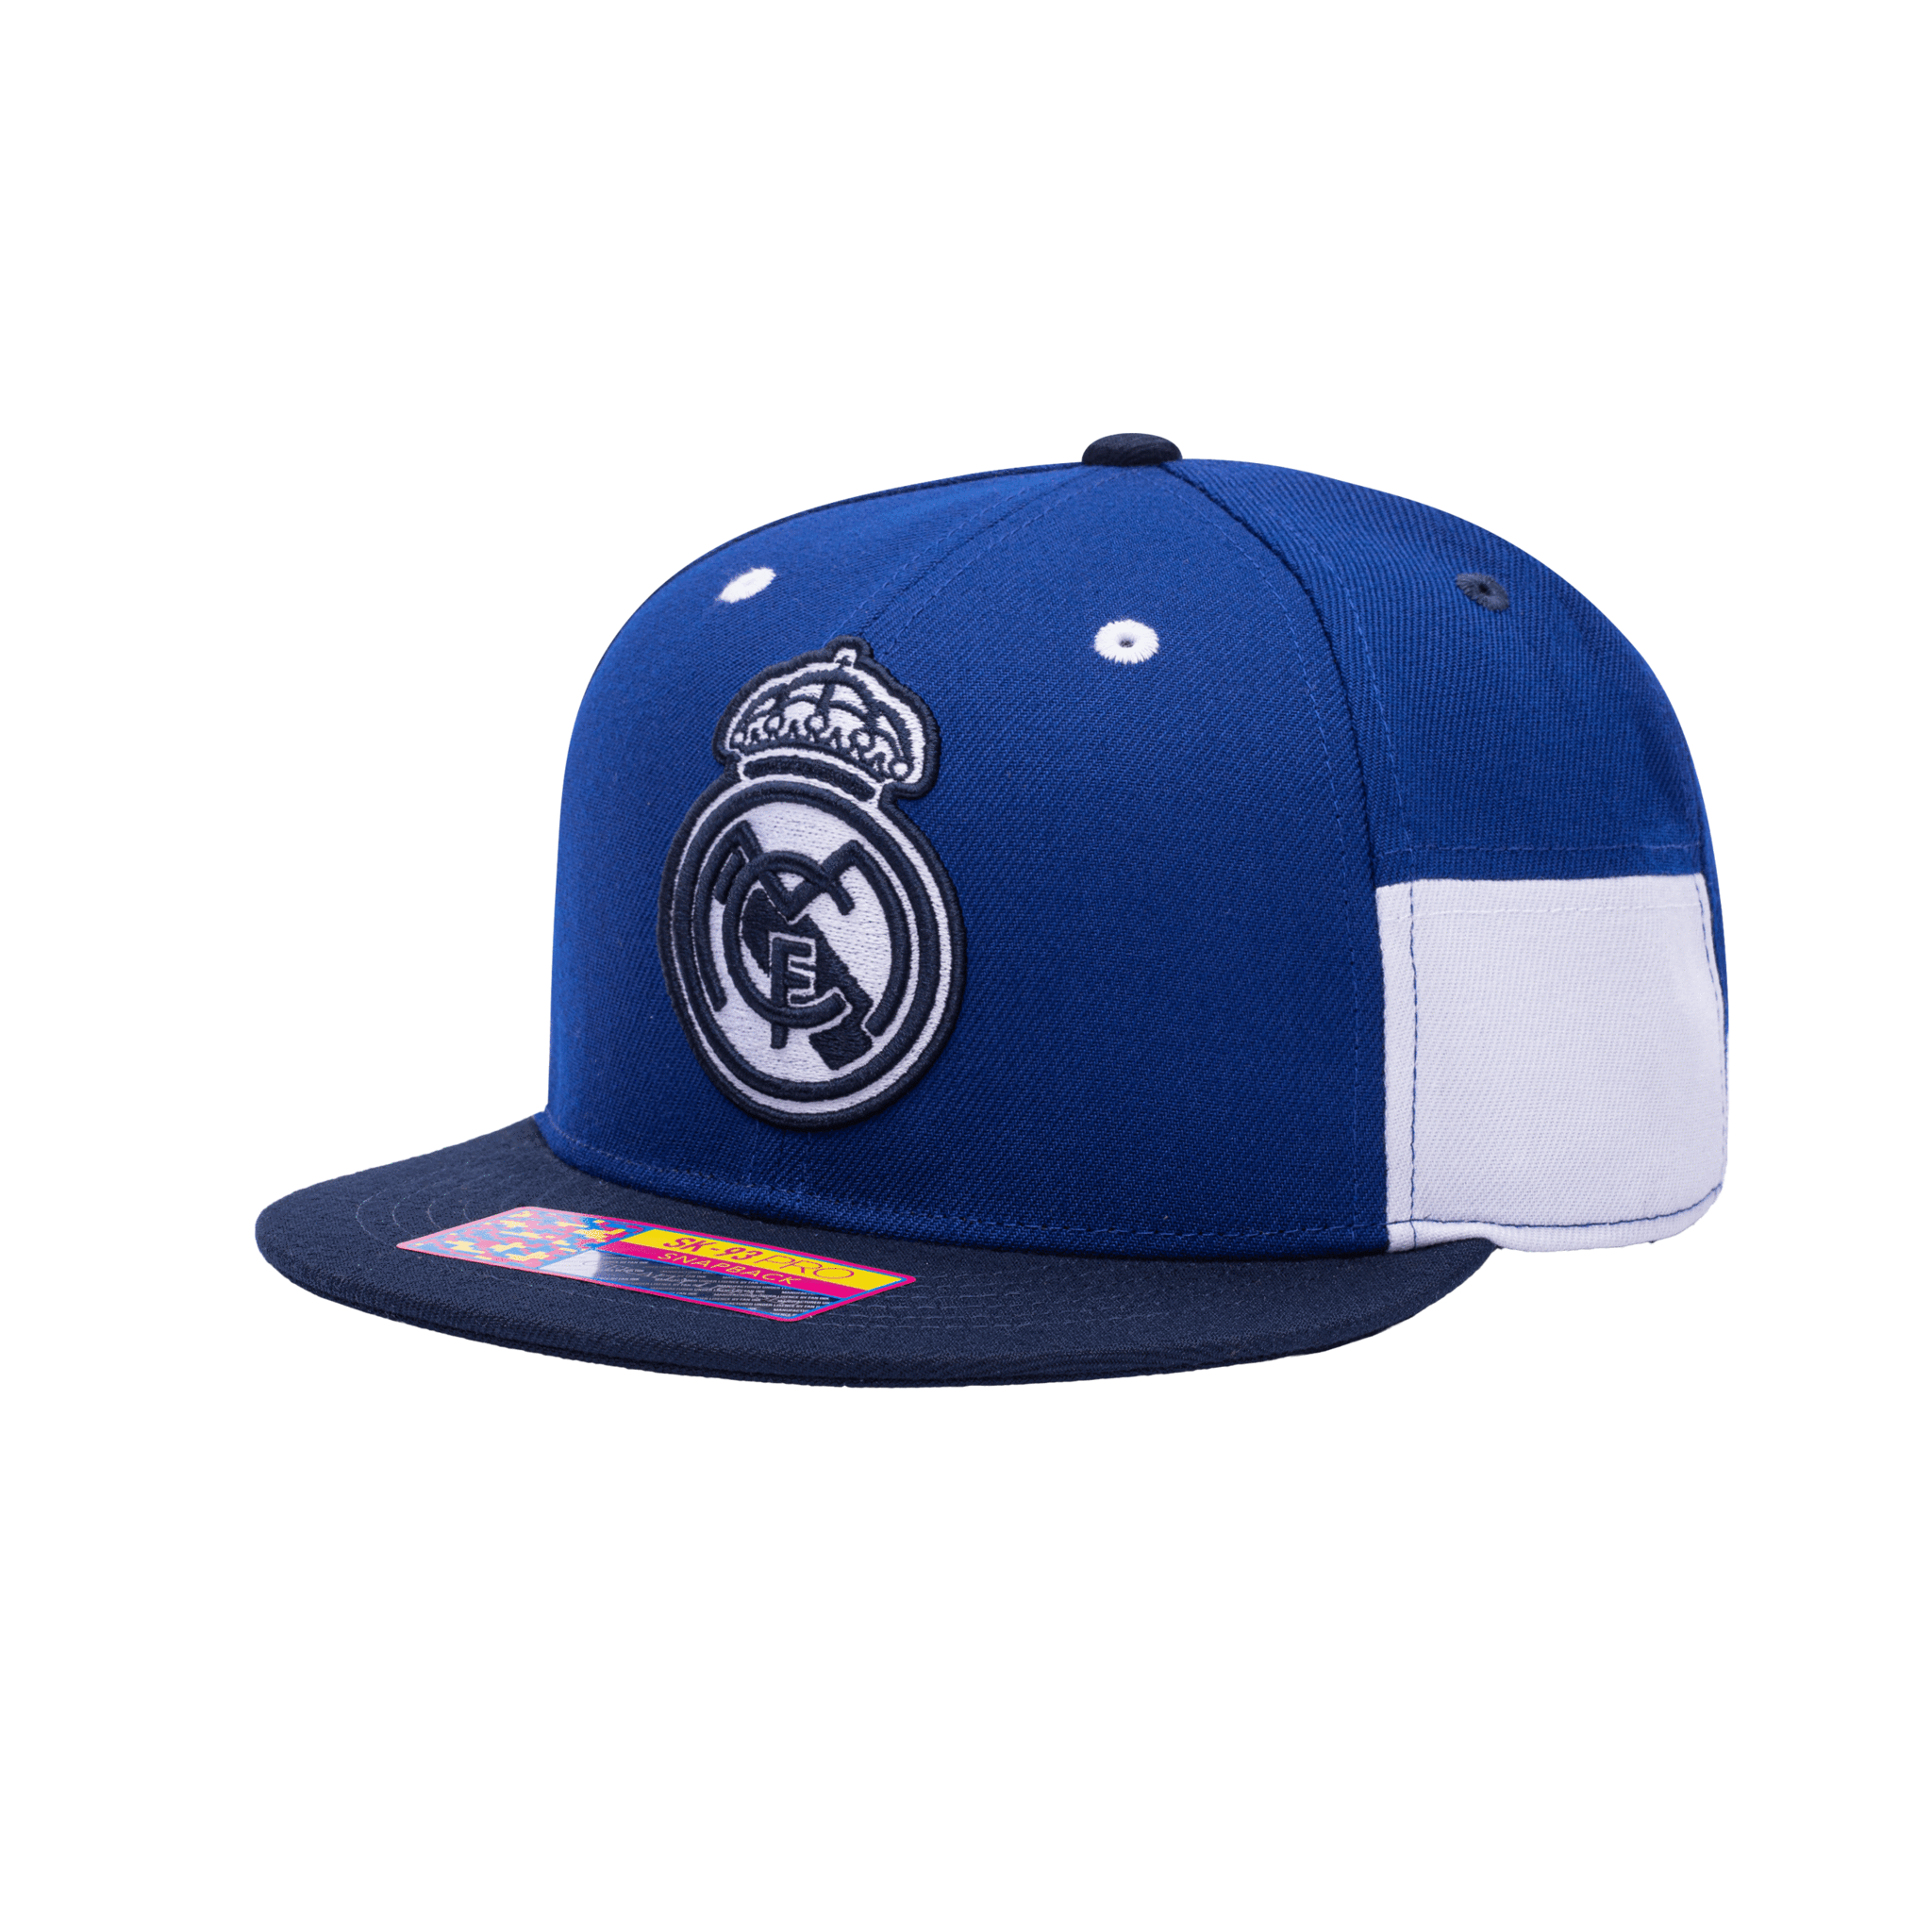 FI COLLECTIONS REAL MADRID TRUITT SNAPBACK